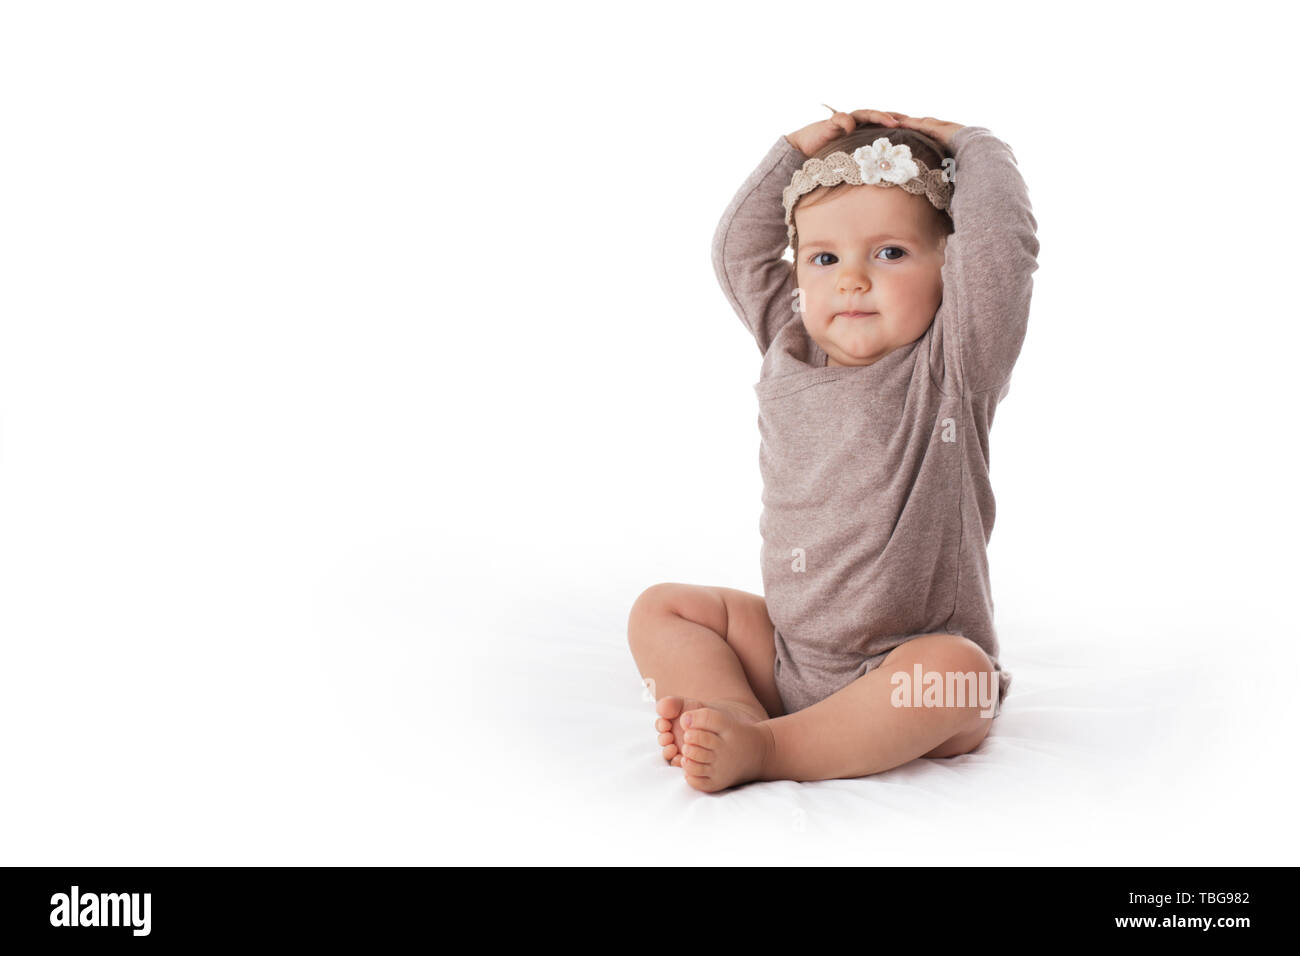 Cute eight month baby girl portrait on white background Stock Photo